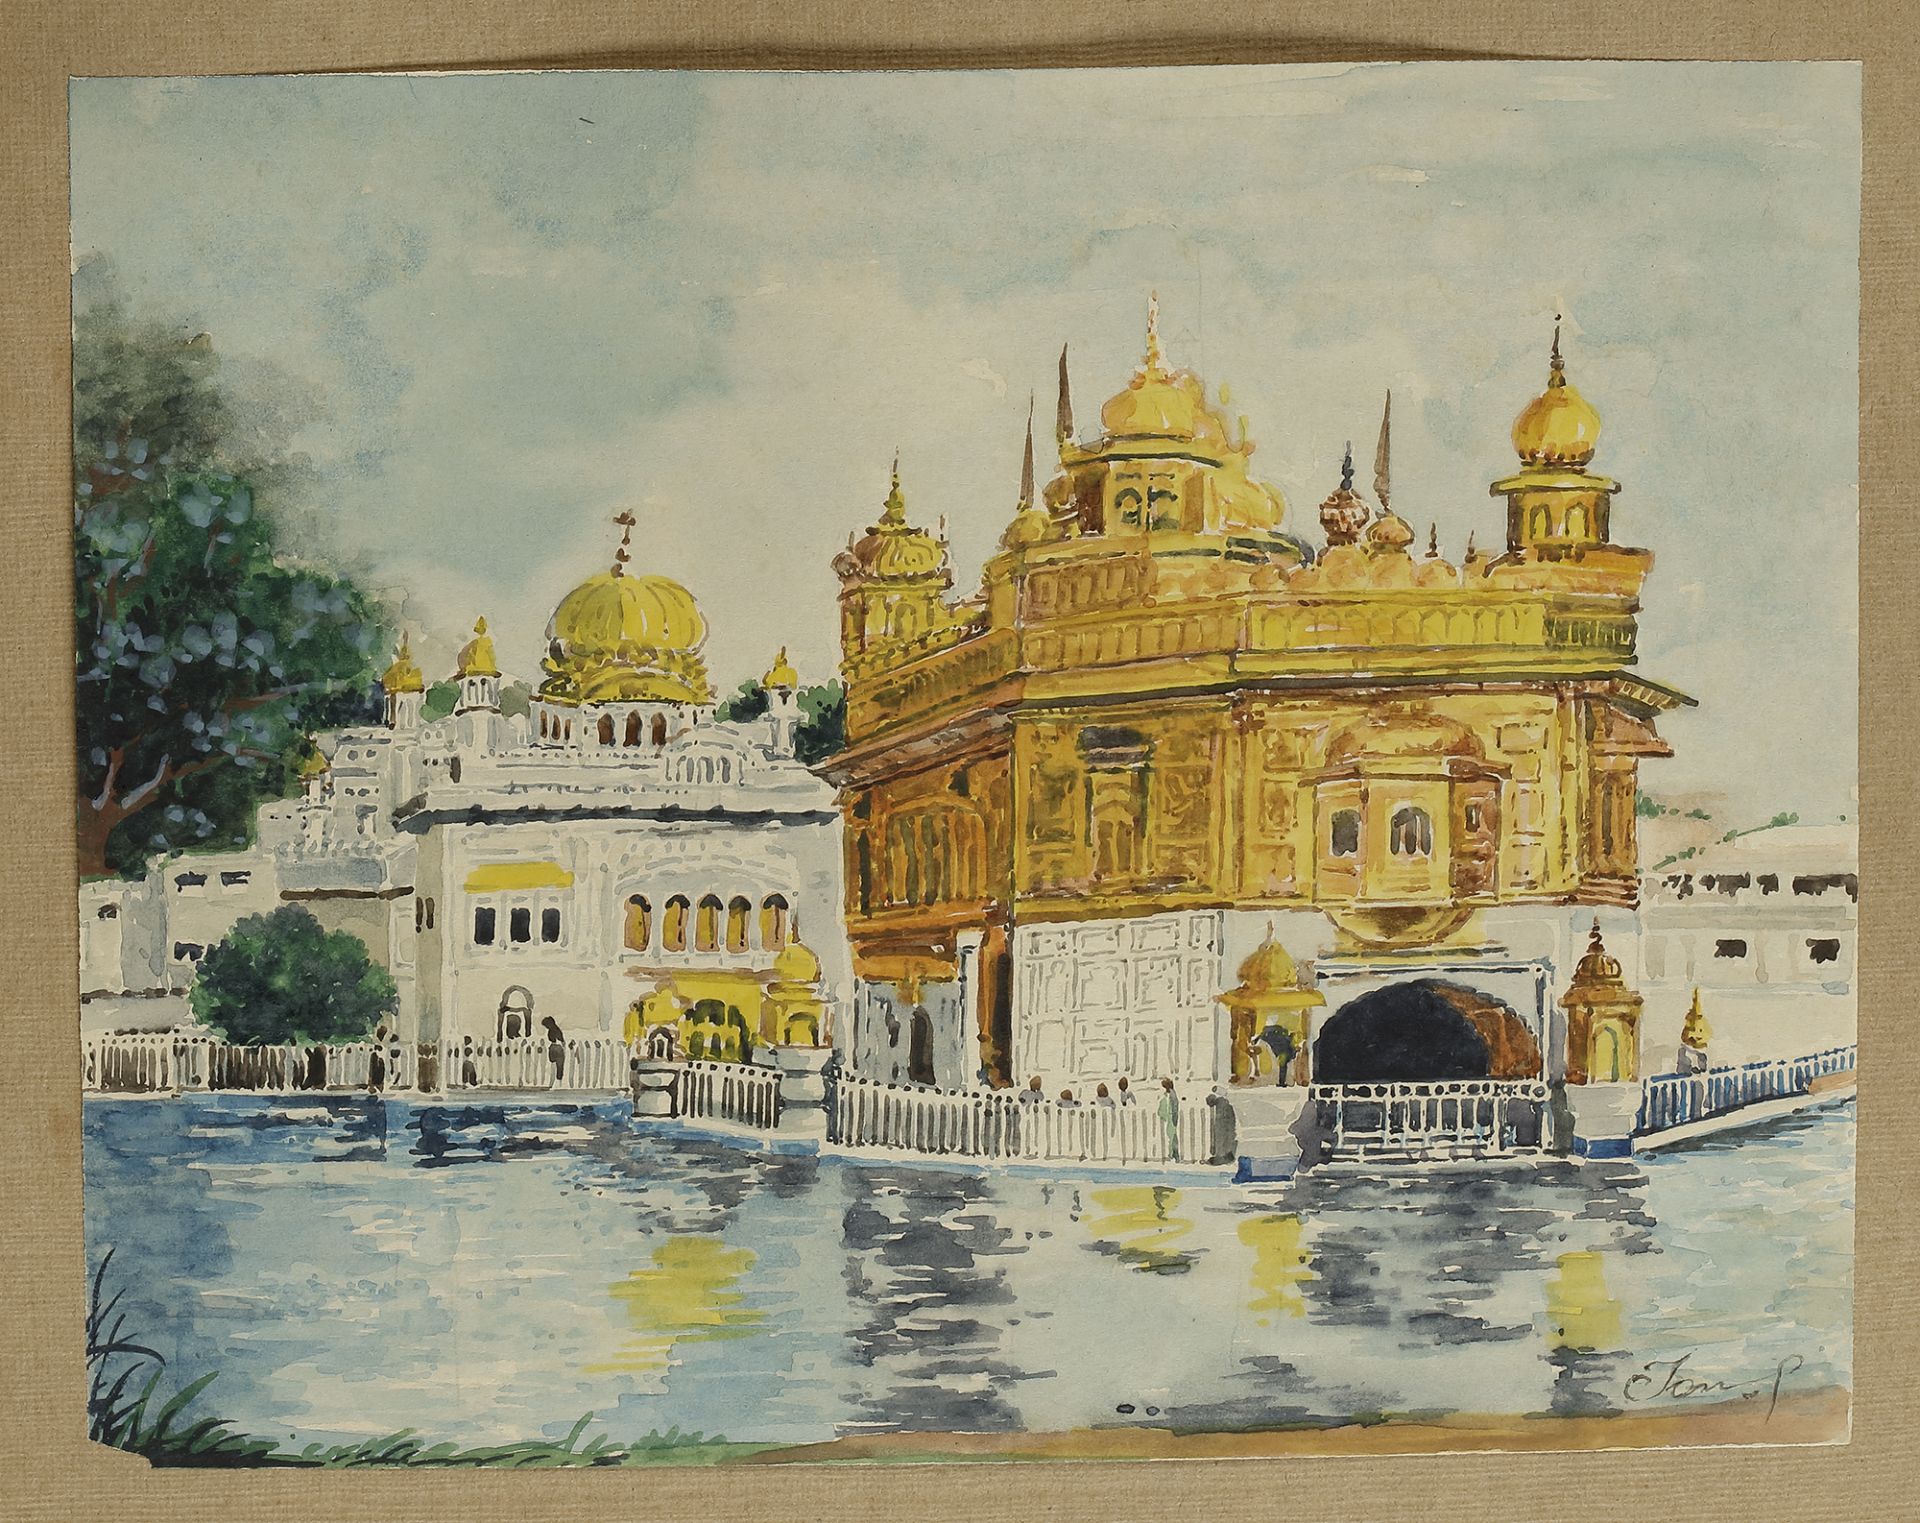 VIEWS OF THE GOLDEN TEMPLE AT AMRITSAR EUROPEAN SCHOOL, 19TH CENTURY - Image 5 of 10